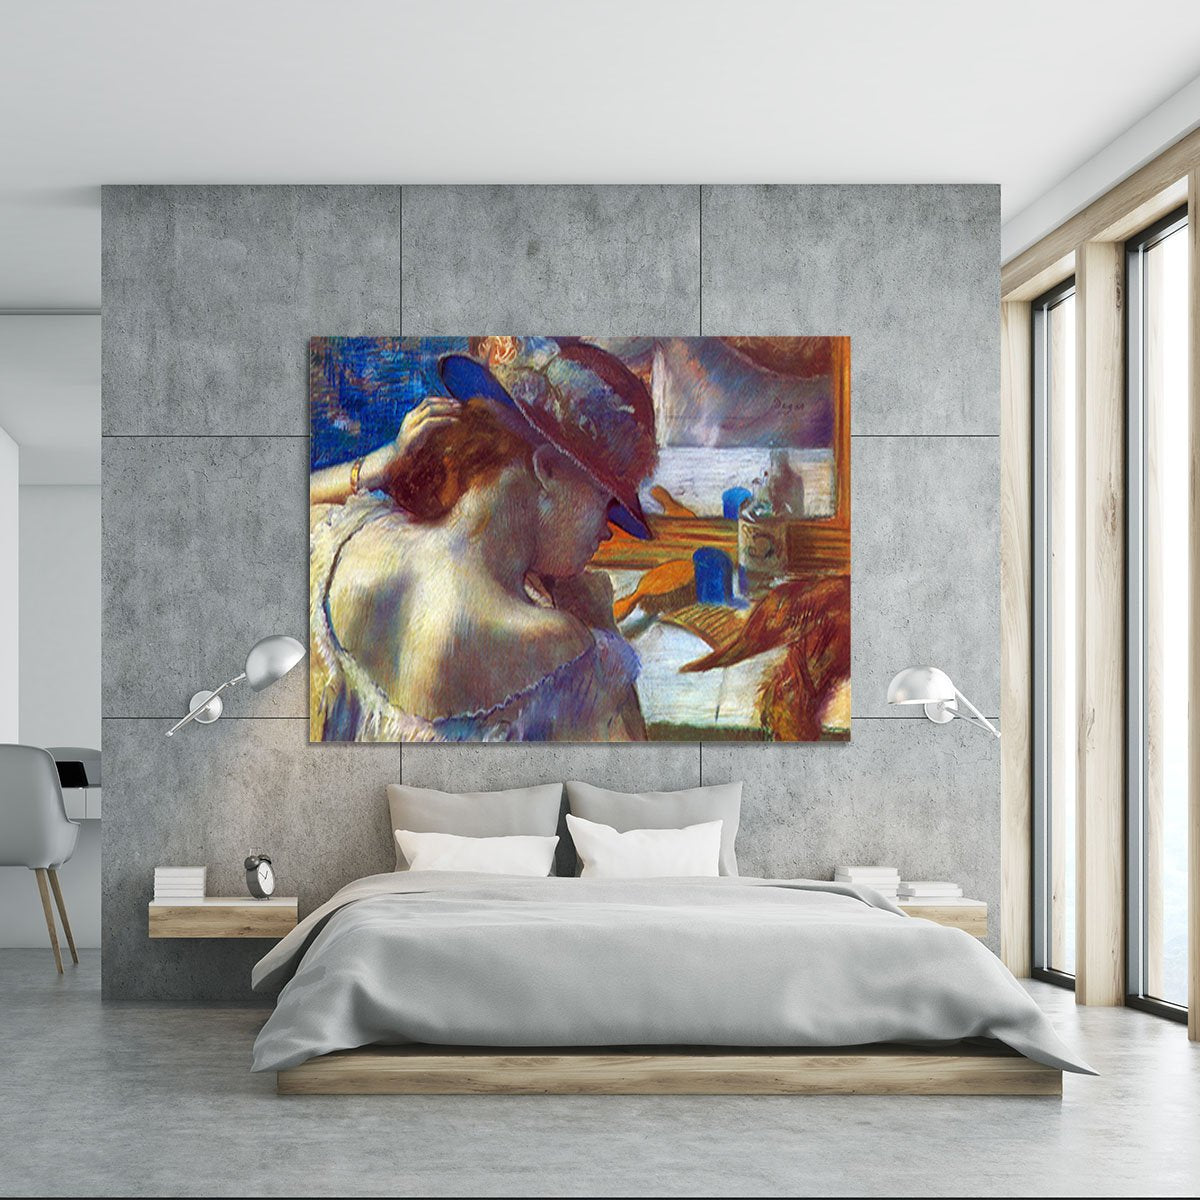 Before the mirror by Degas Canvas Print or Poster